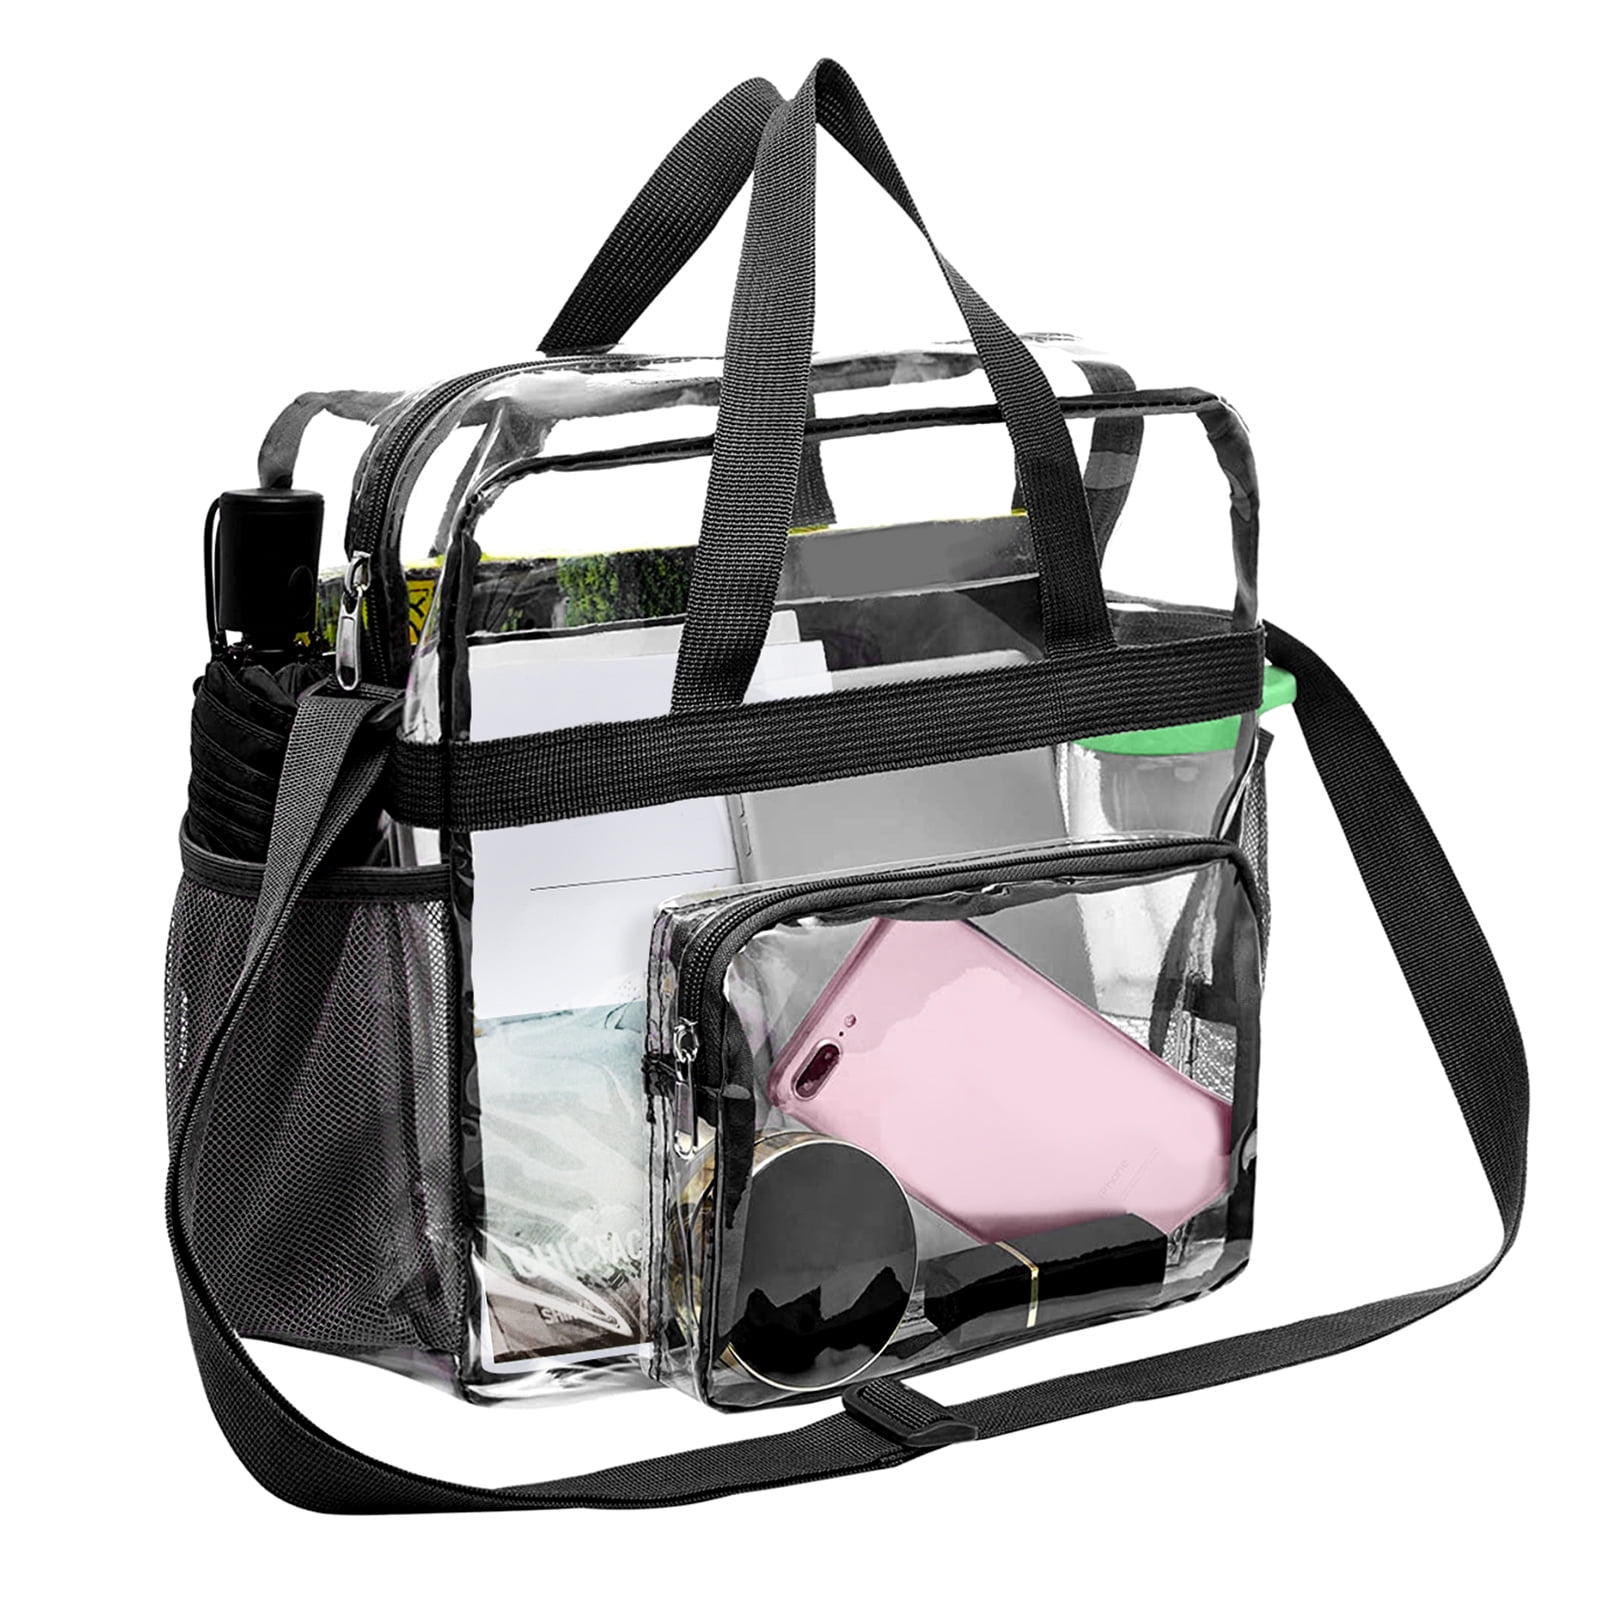 Concert or Work Premium Quality Clear Crossbody Bag Stadium Approved for the Game